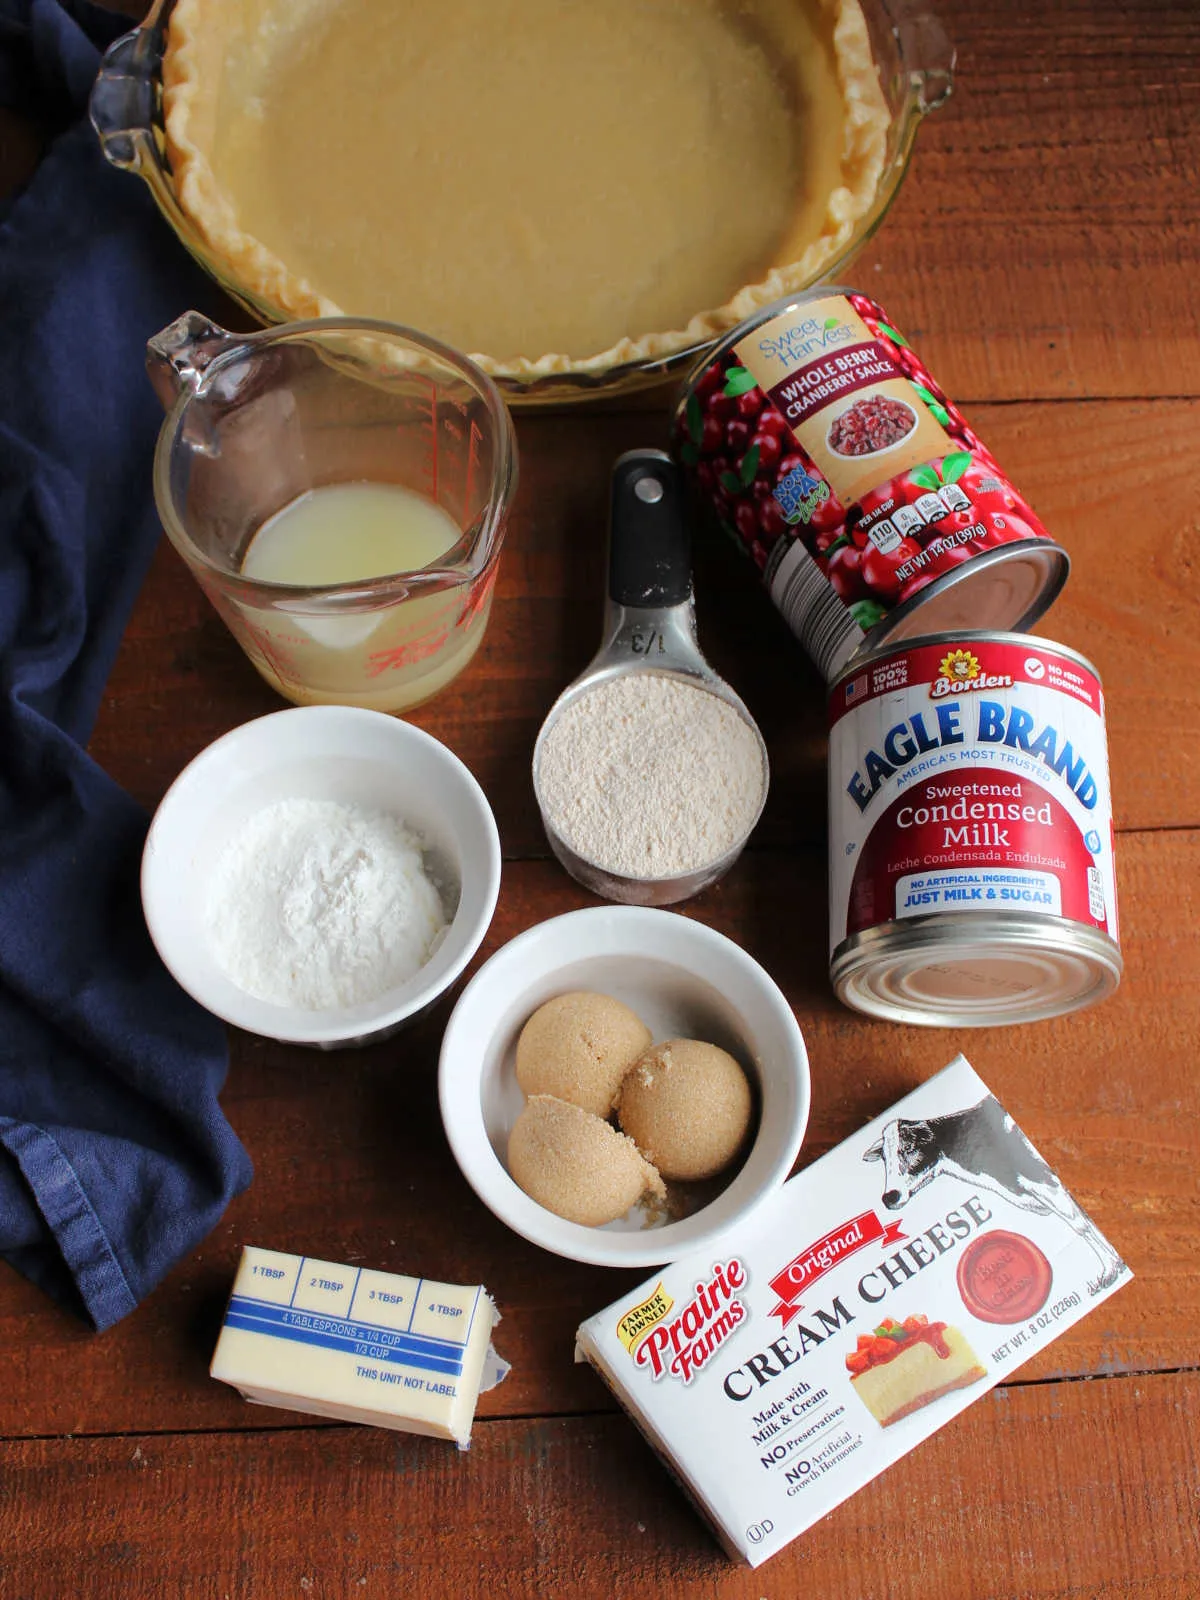 Ingredients including partially baked pie crust, cranberry sauce, sweetened condensed milk, cream cheese, brown sugar, flour, cornstarch, butter, and lemon juice ready to be made into a cranberry crumble pie.